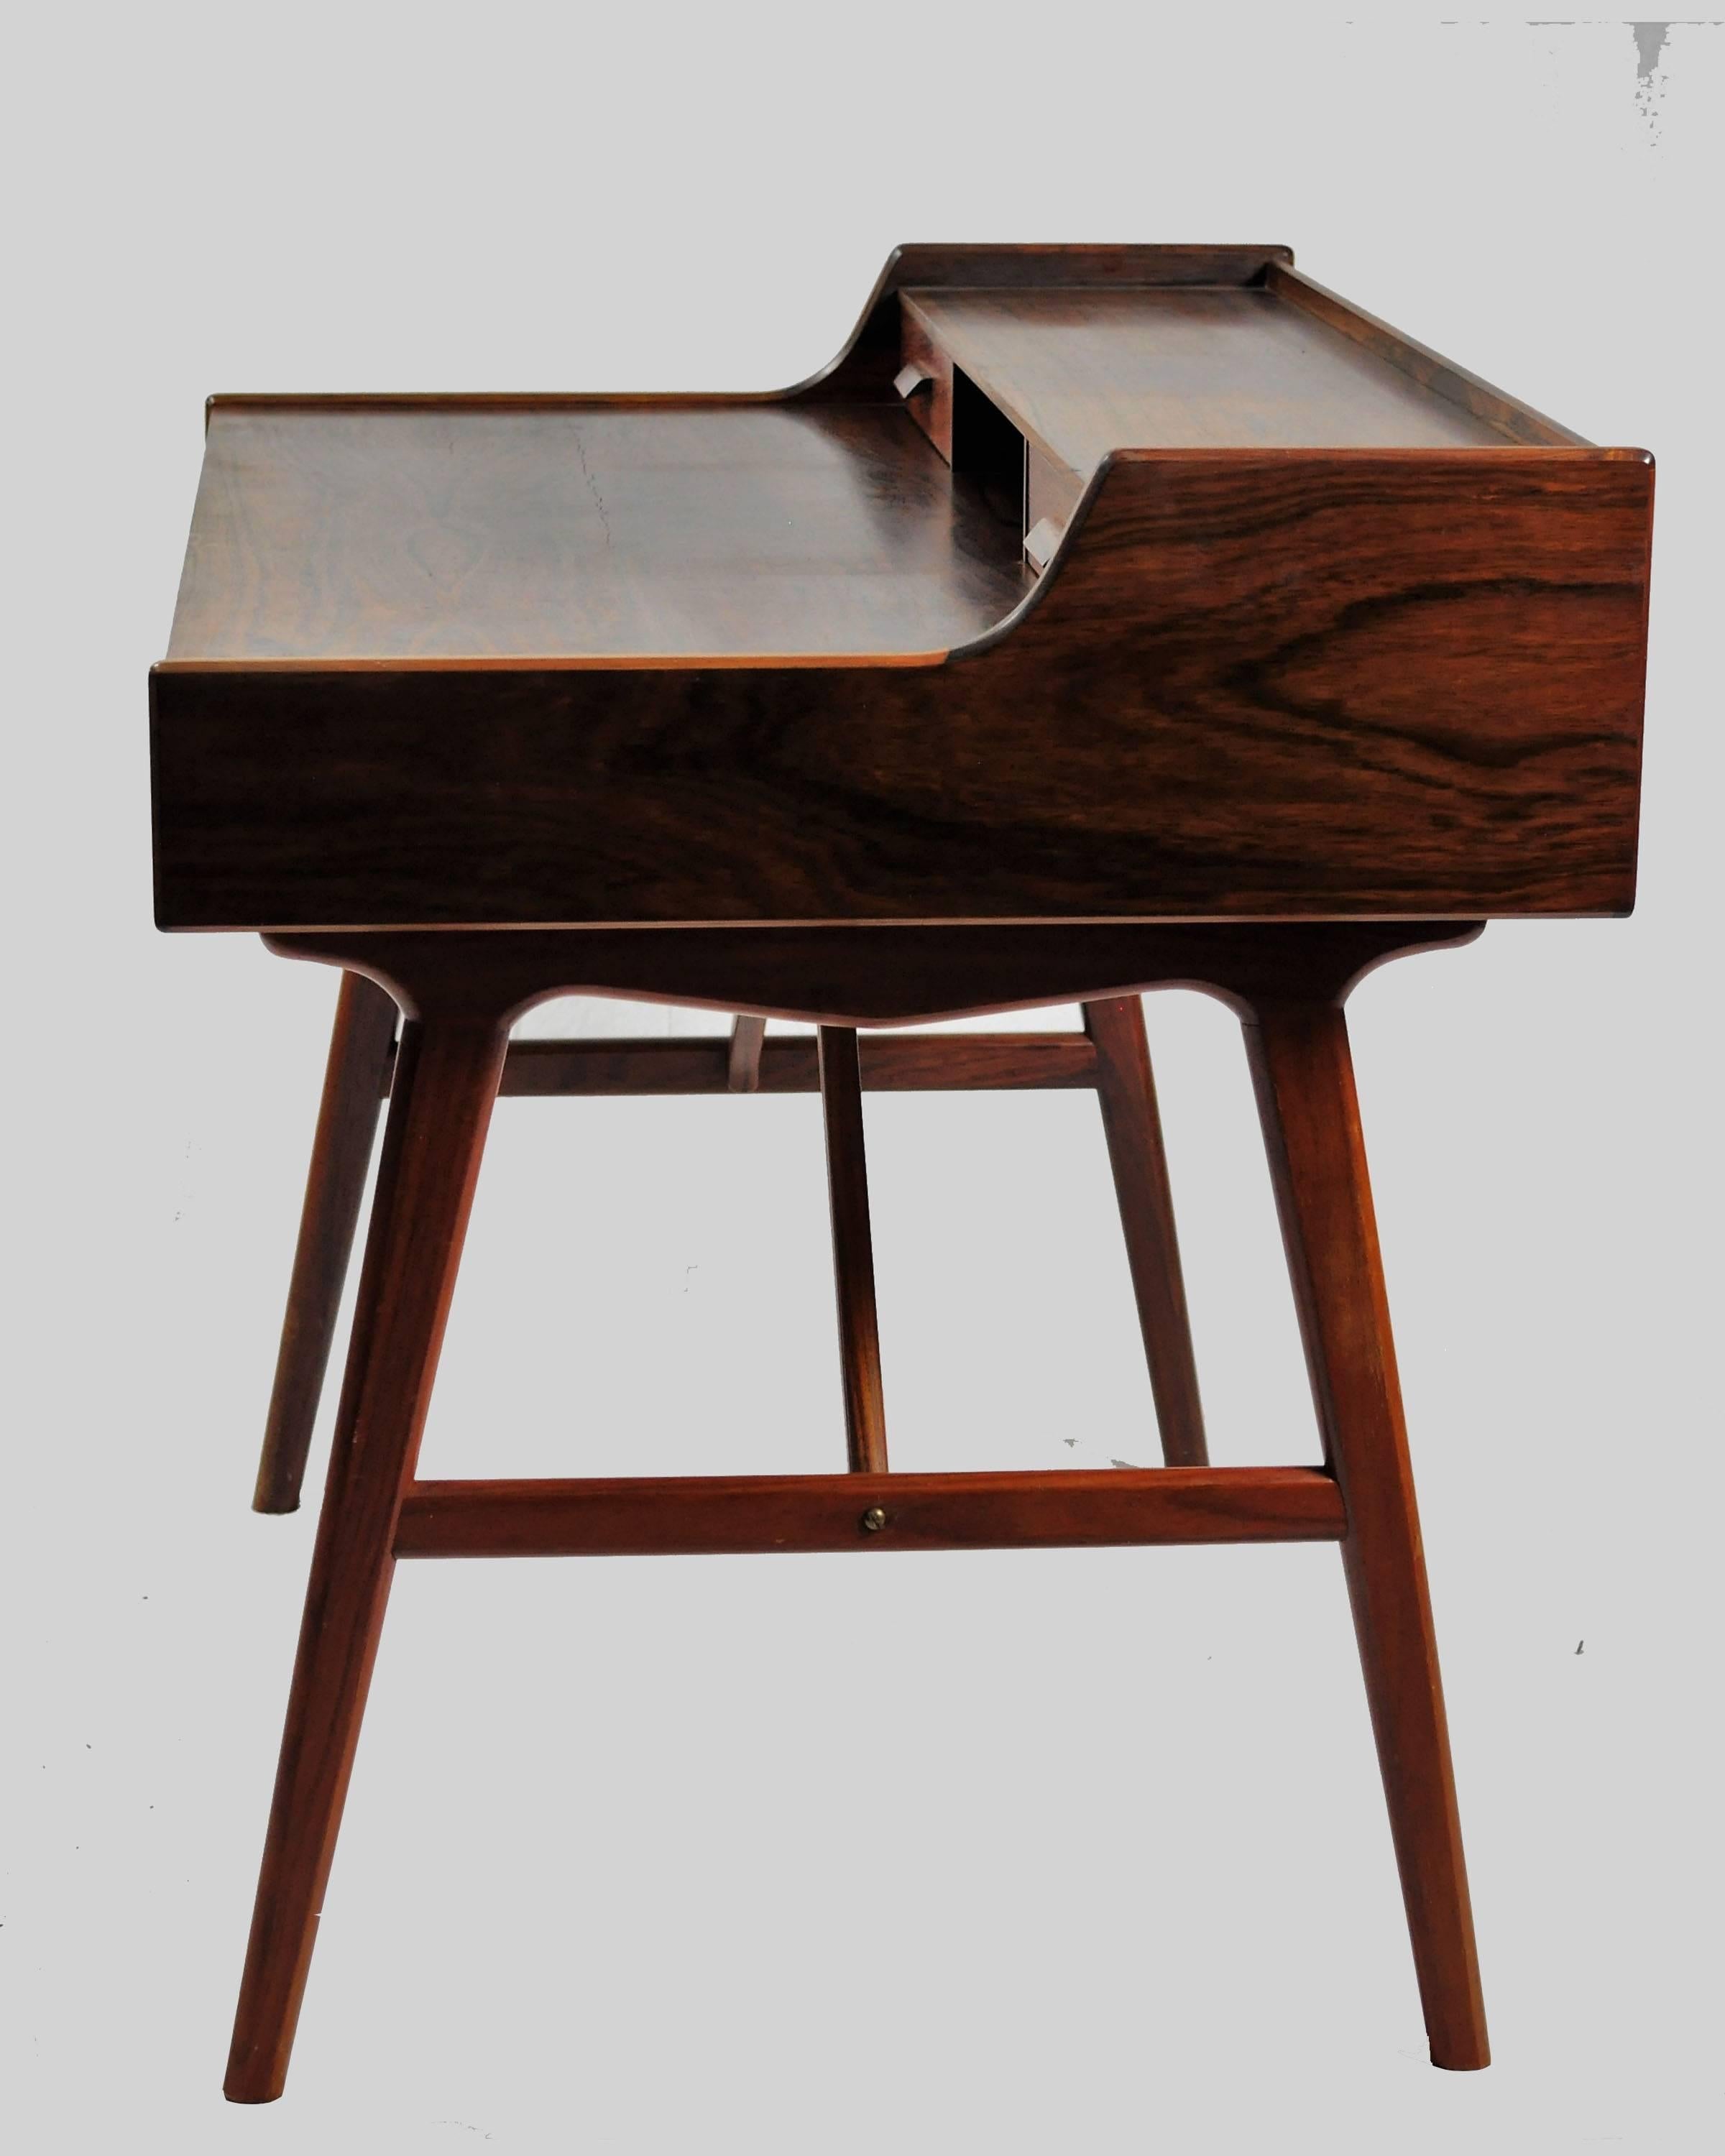 Desk in rosewood designed in 1961 by Arne Wahl Iversen for Vinde Møbelfabrik.

The desk is refinished and in very good condition.